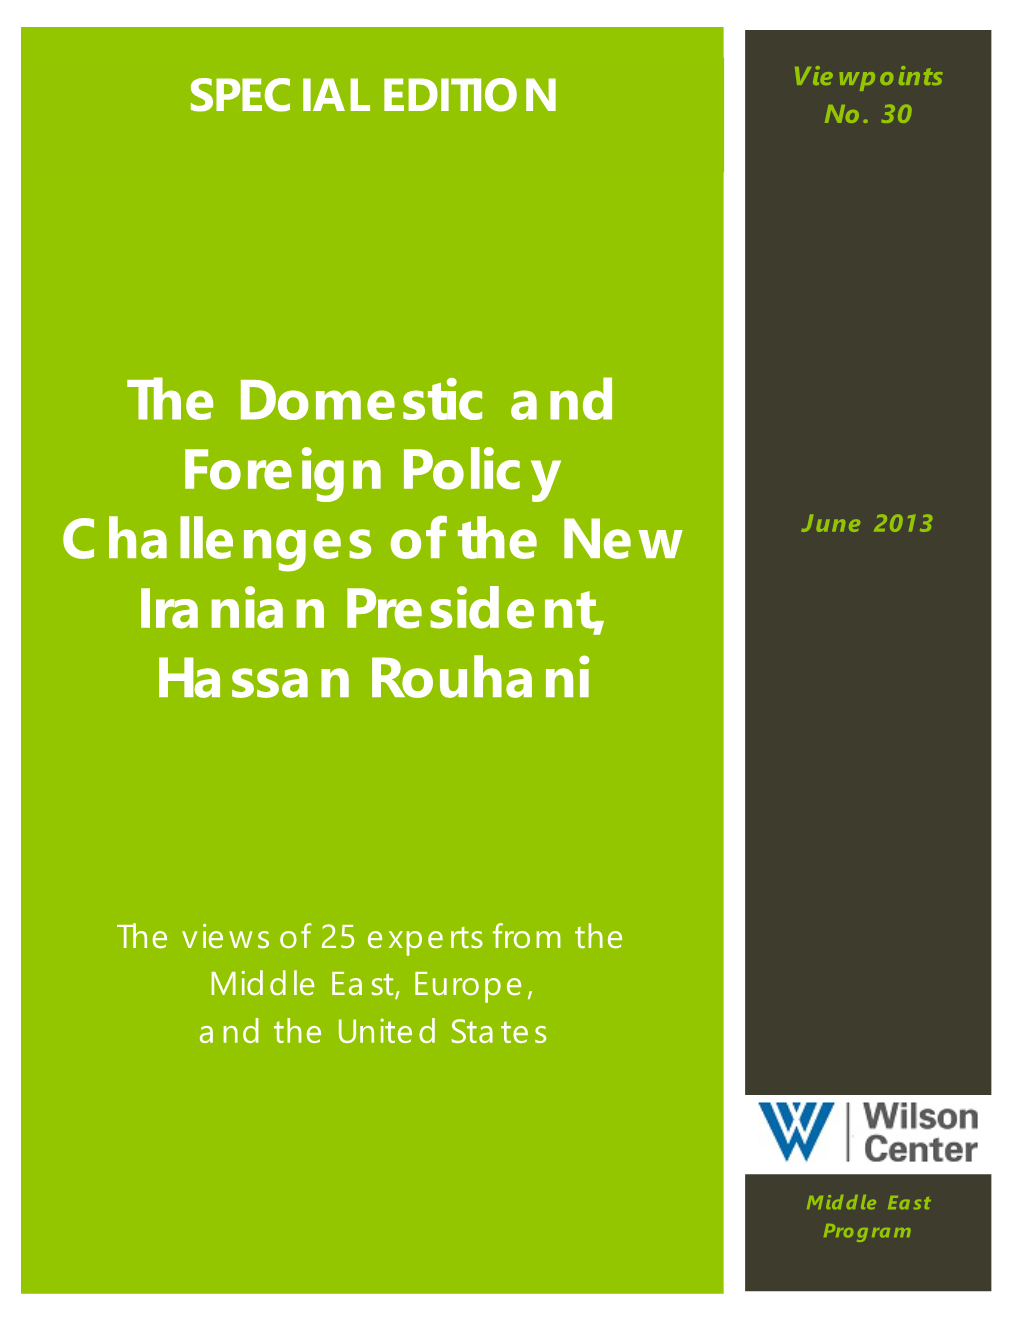 The Domestic and Foreign Policy Challenges of the New Iranian President, Hassan Rouhani